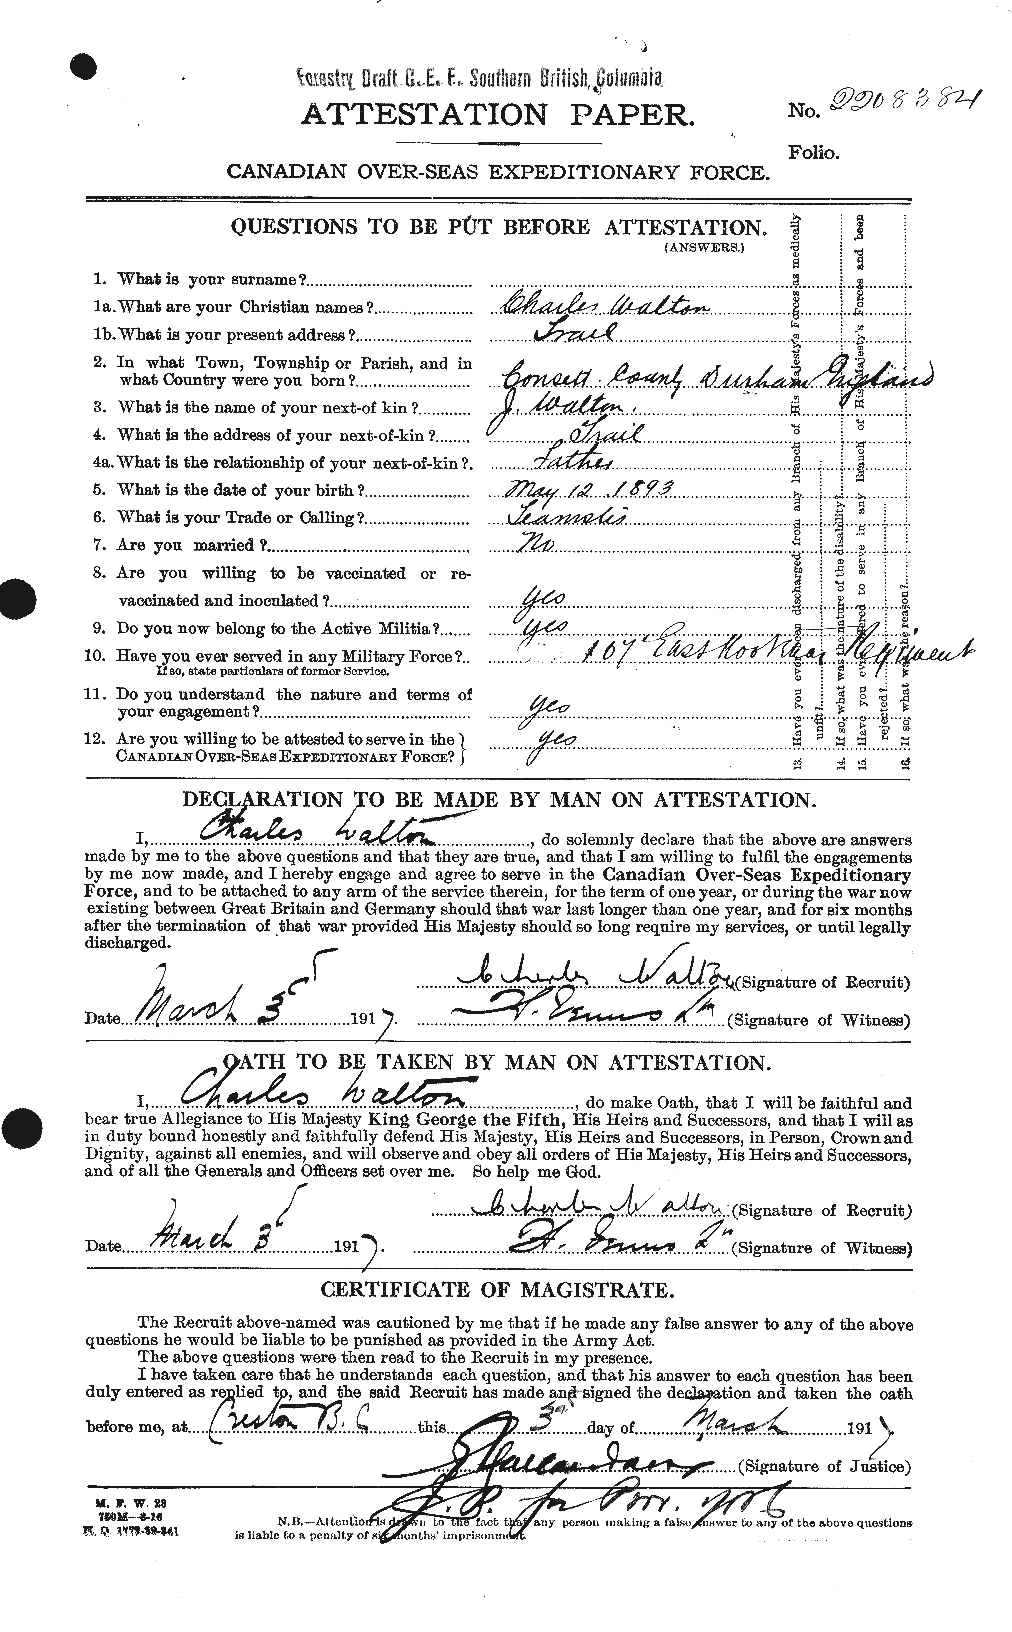 Personnel Records of the First World War - CEF 655526a